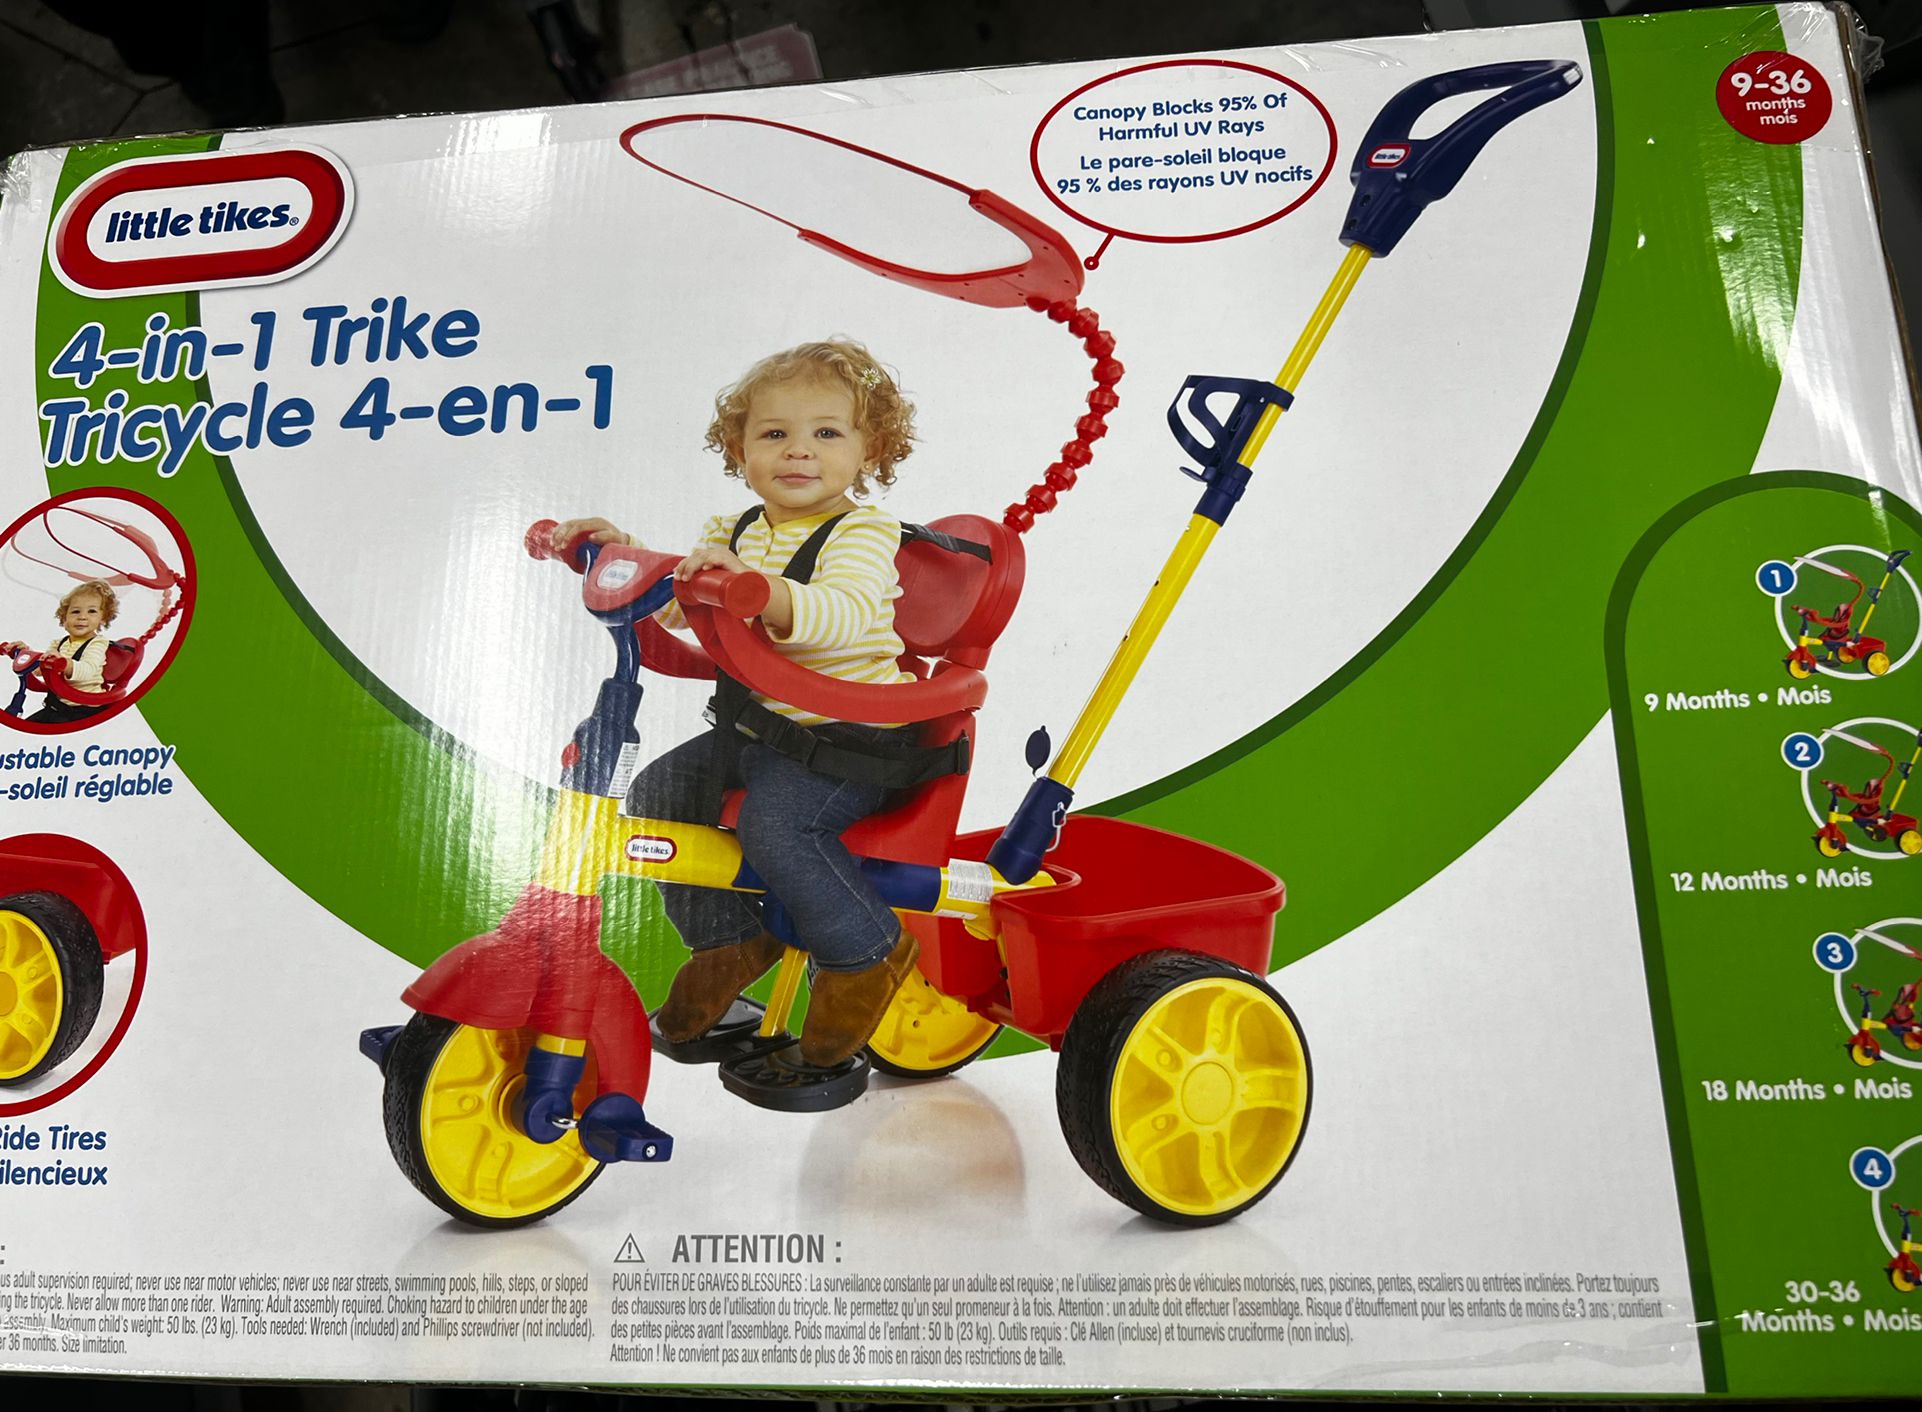 Little tikes 4-in-1 Tricycle 